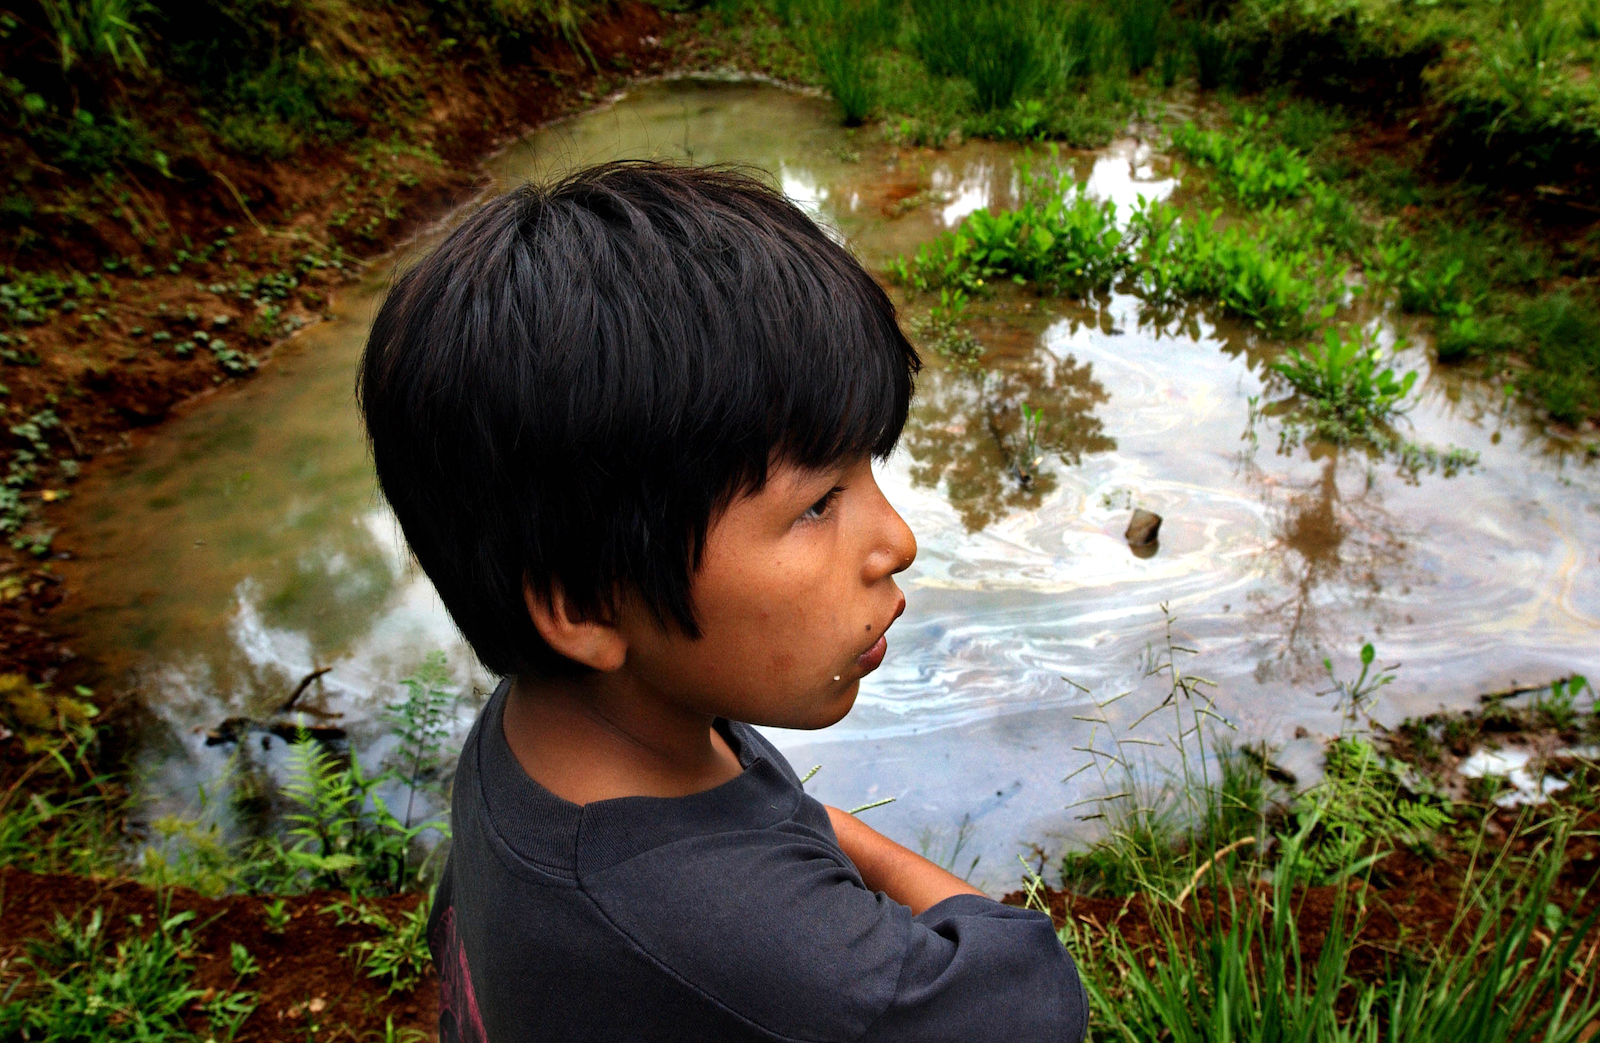 a child looks out over an oil slick pond